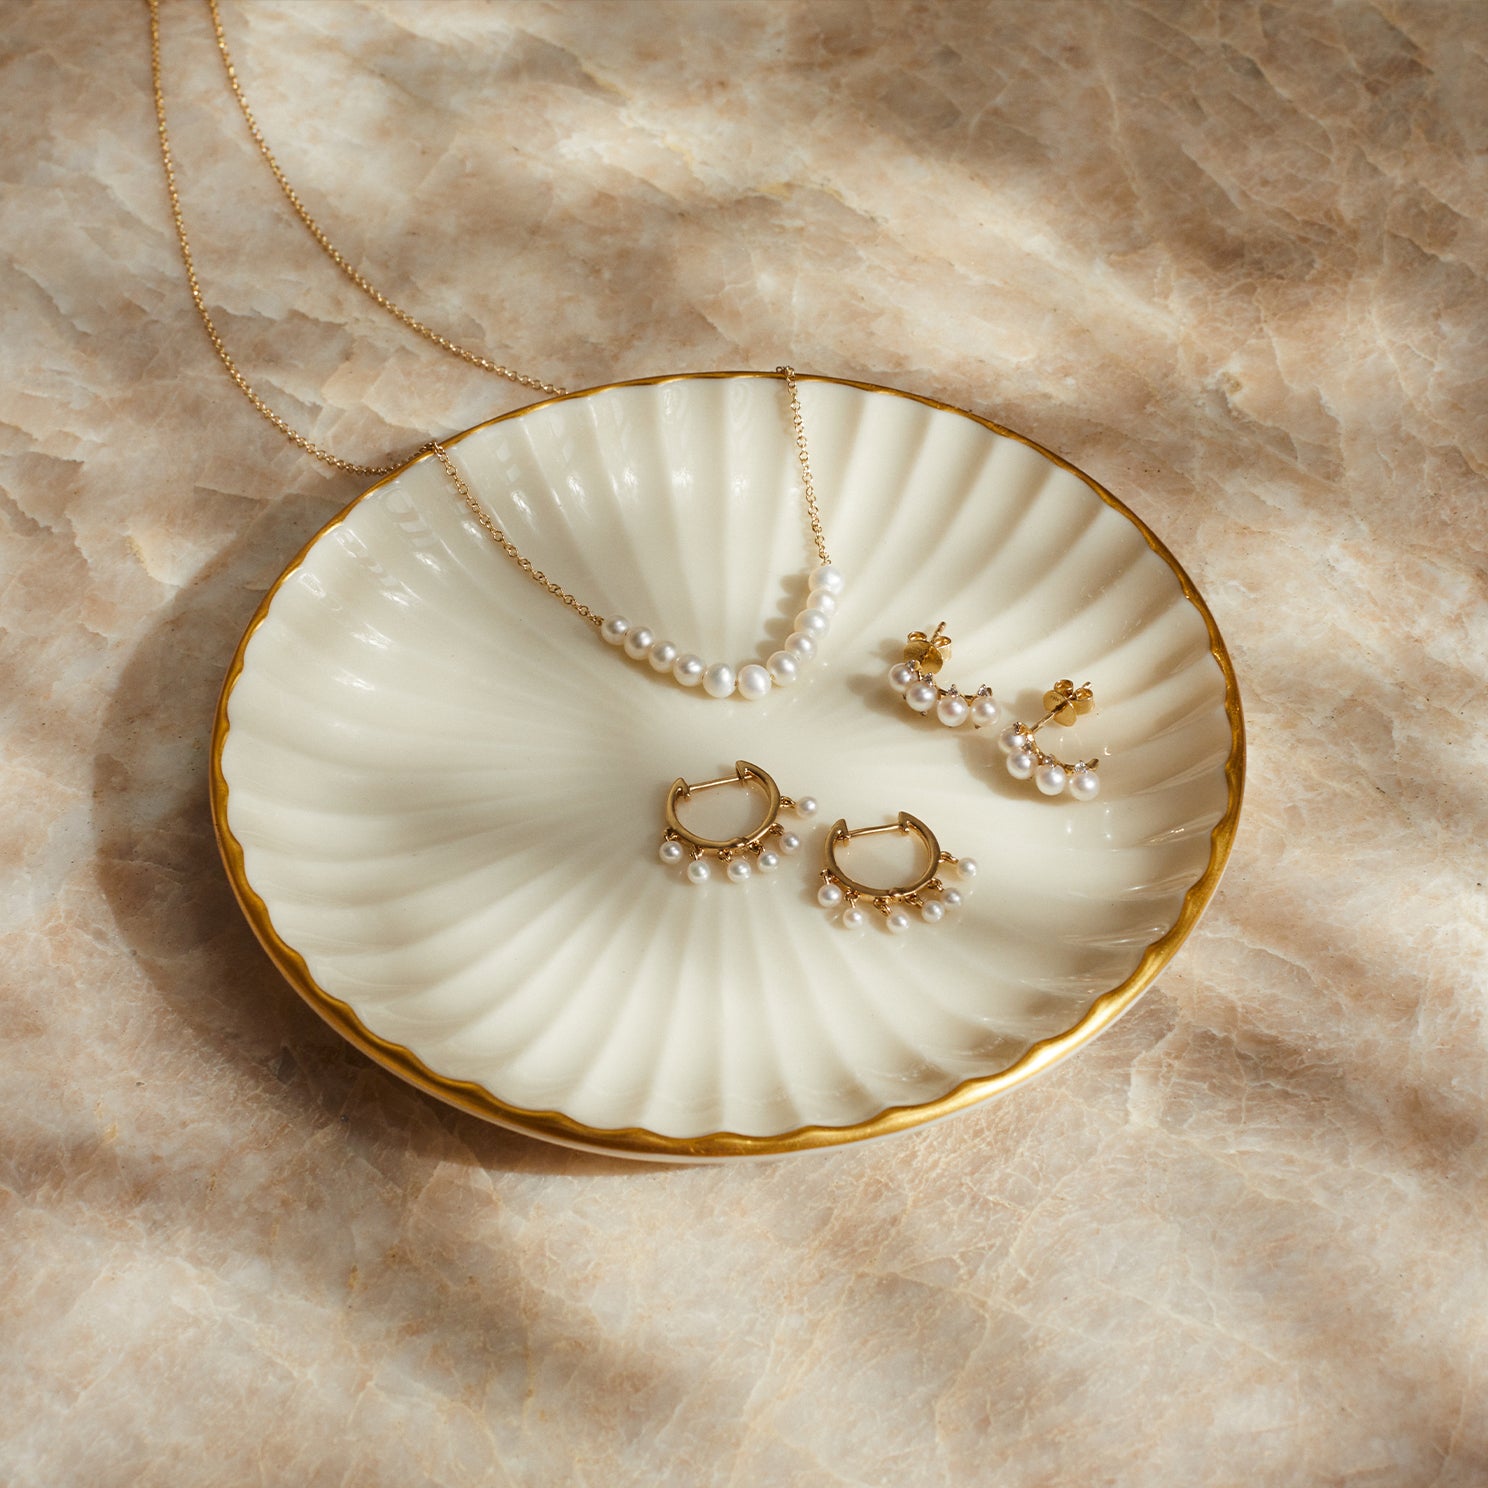 Pearl Necklace in 14k yellow gold laying on top of dish next to mini huggie with pearls and pearl stud earring